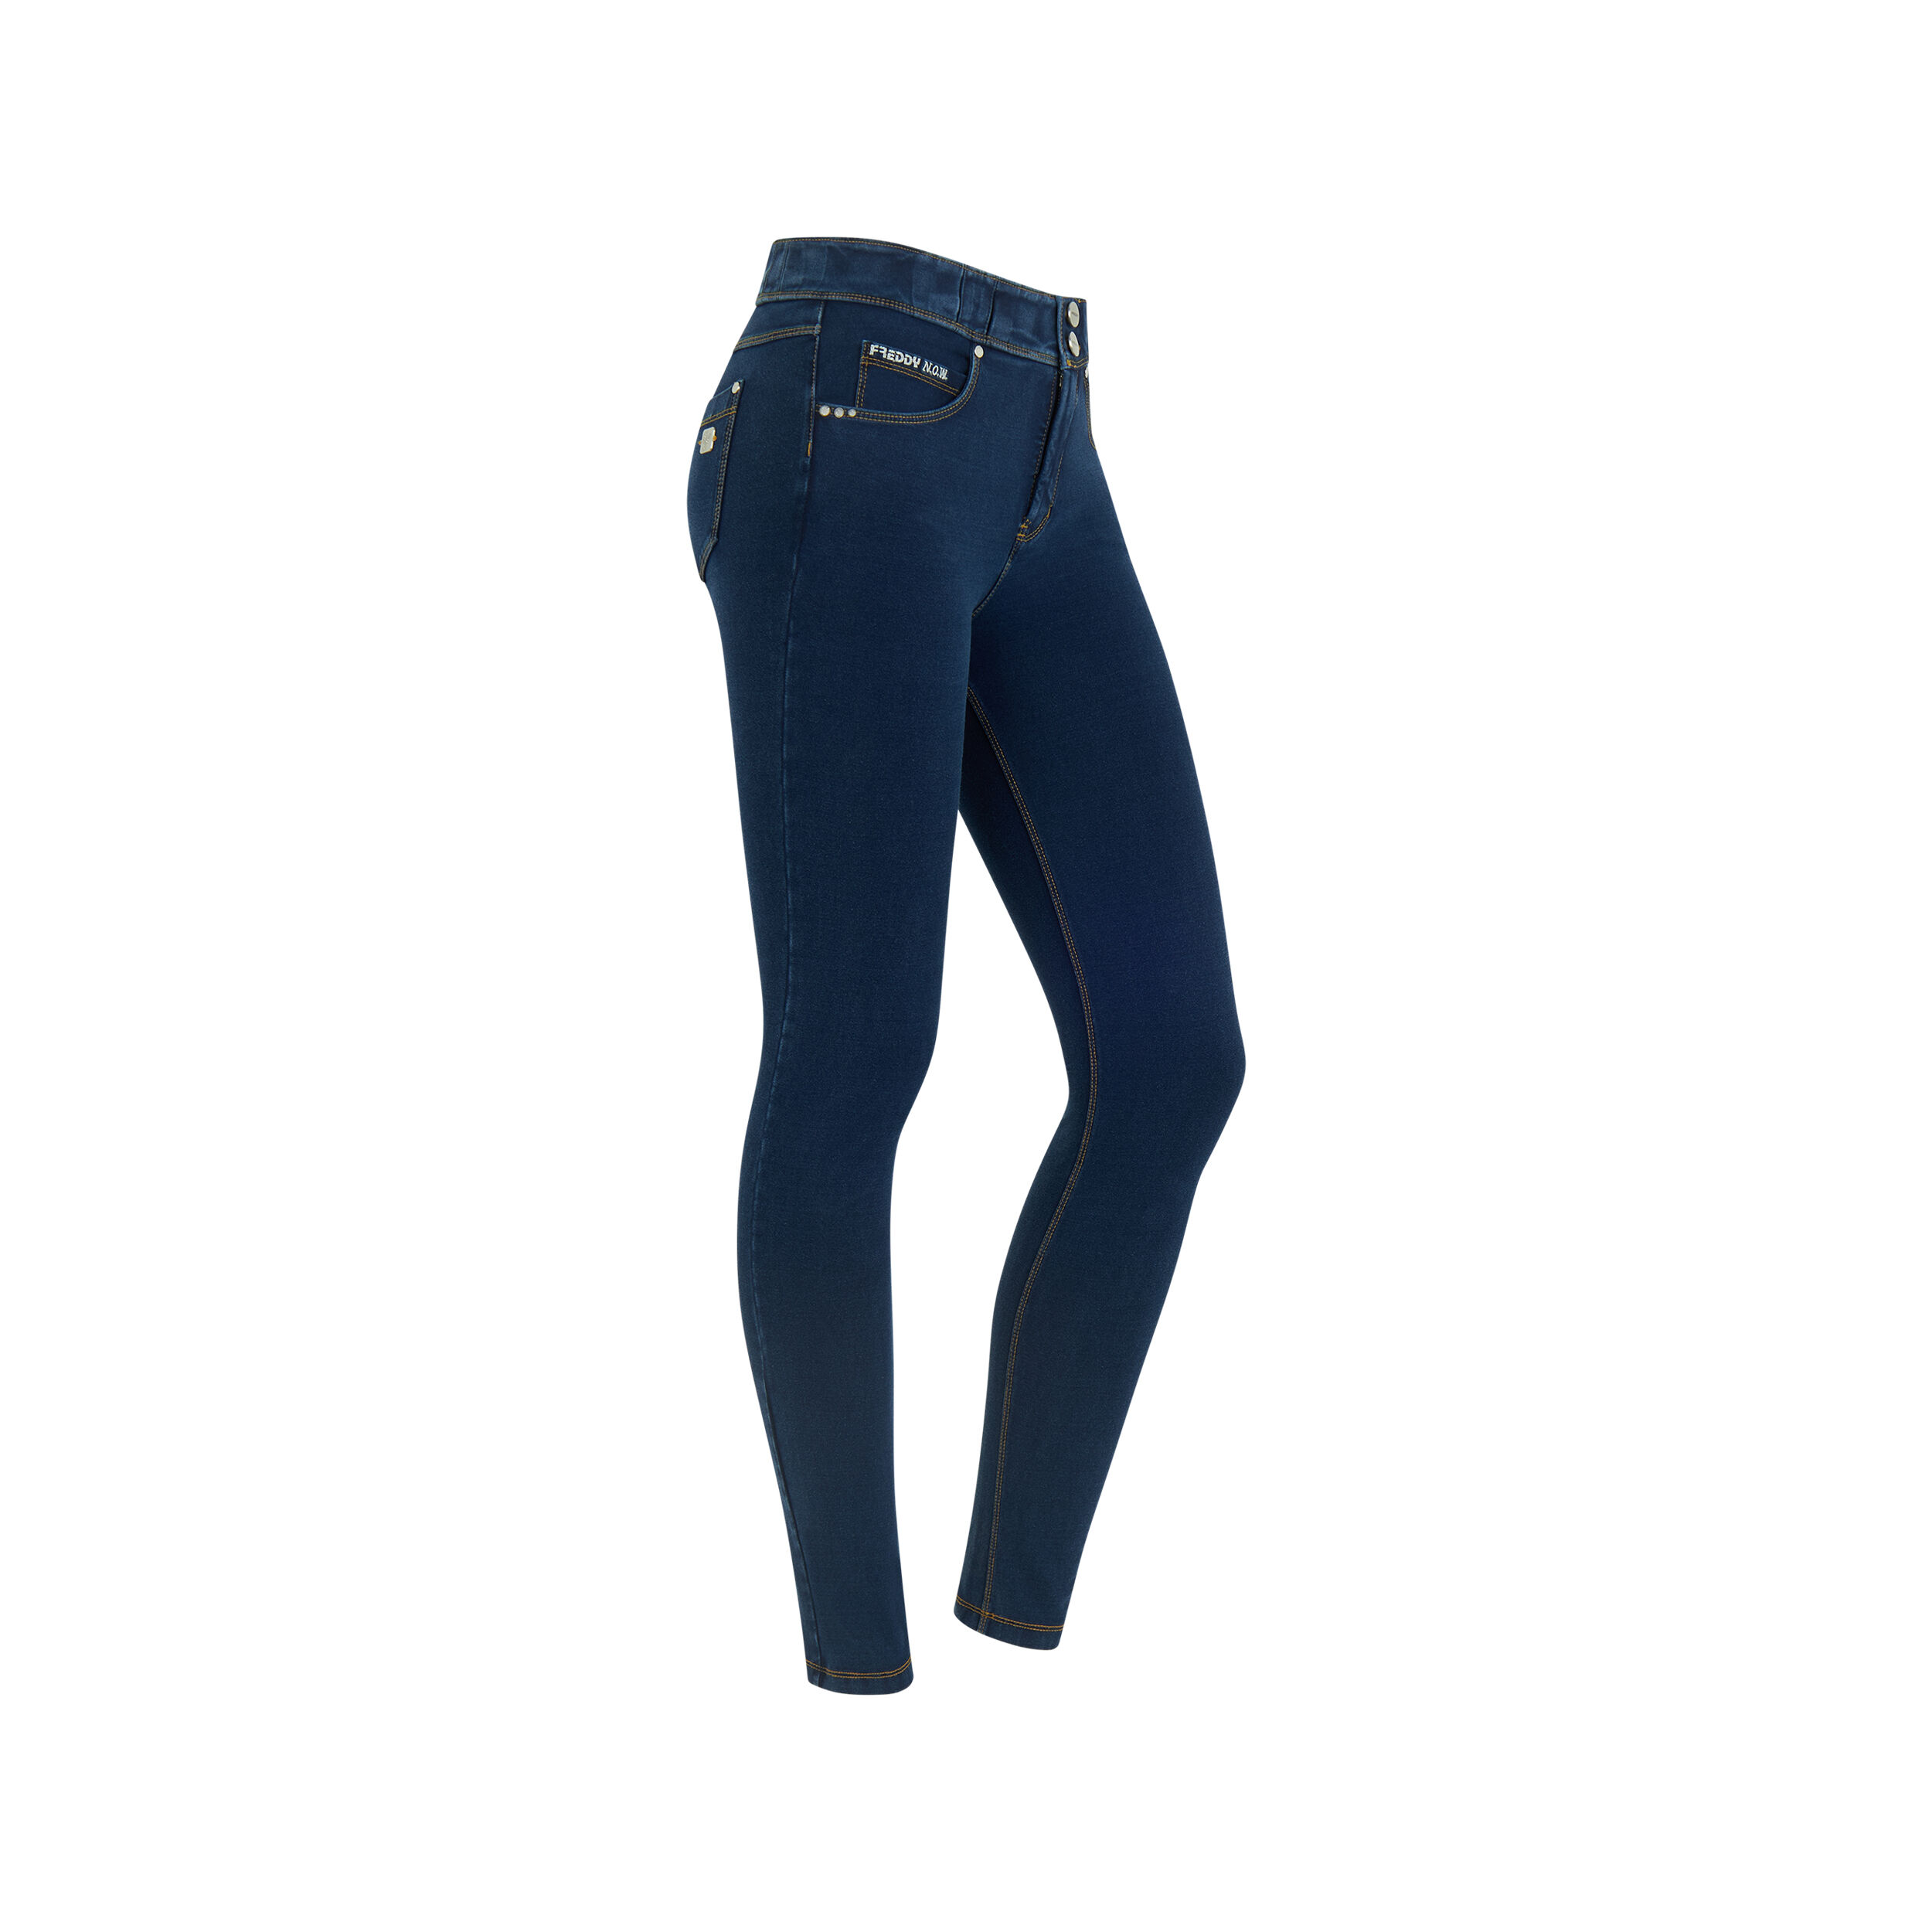 Freddy Pantalone Lungo Jeans-Cuciture Gialle Donna Small